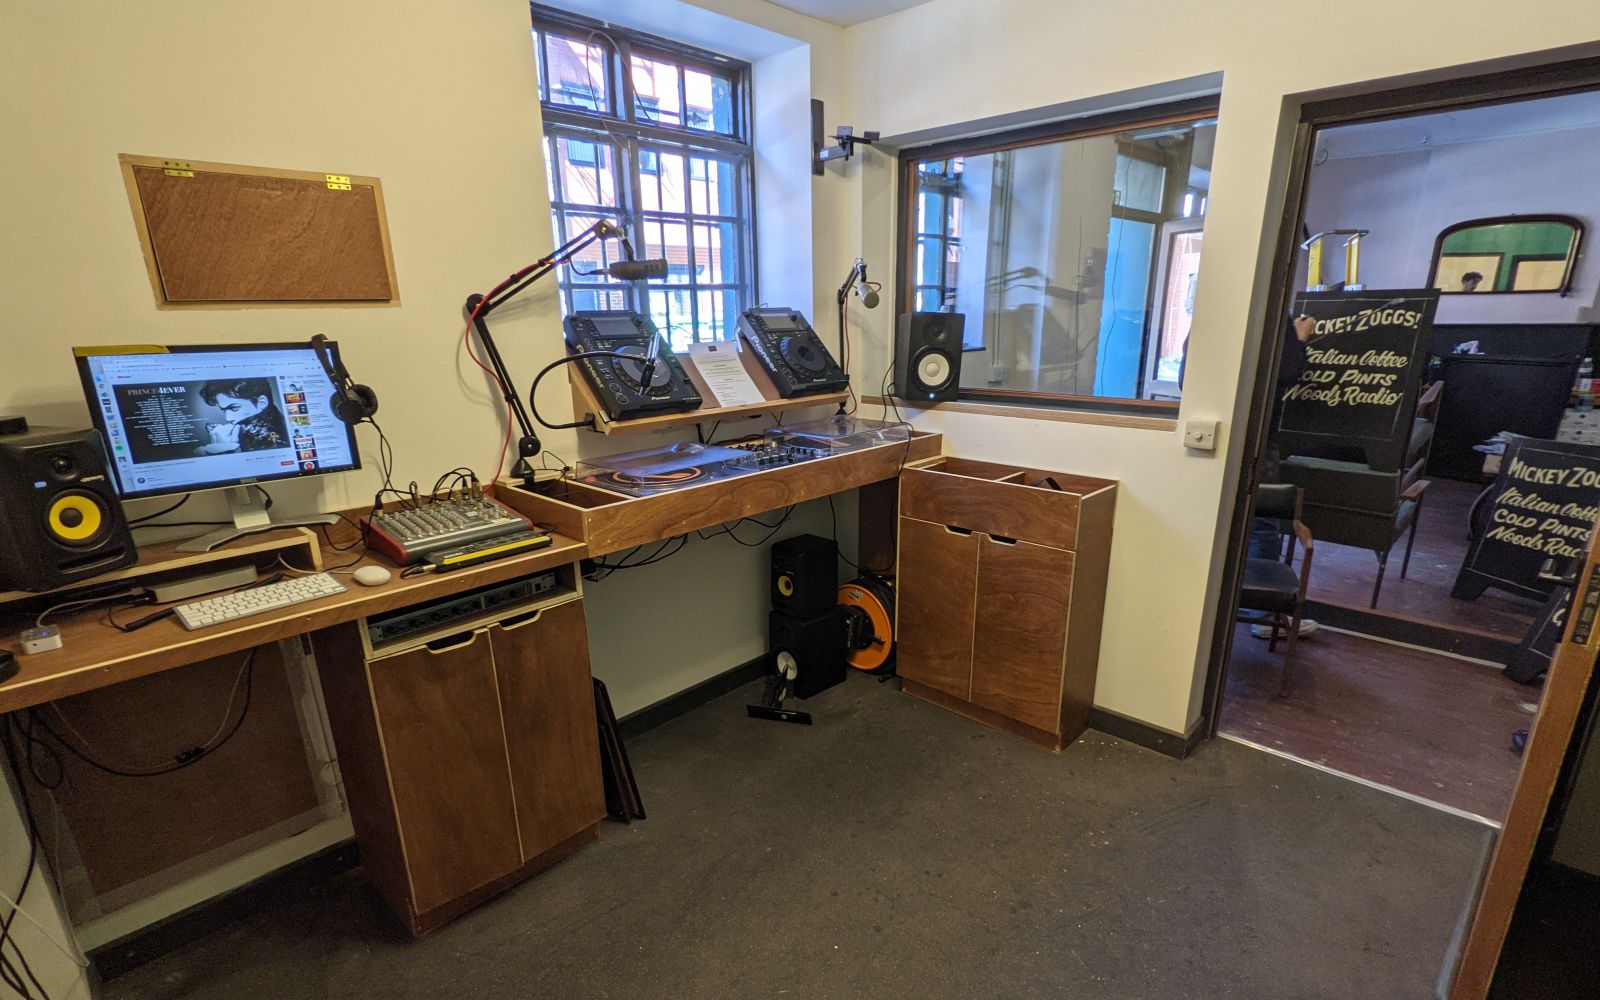 Noods Radio find a new home in old surroundings